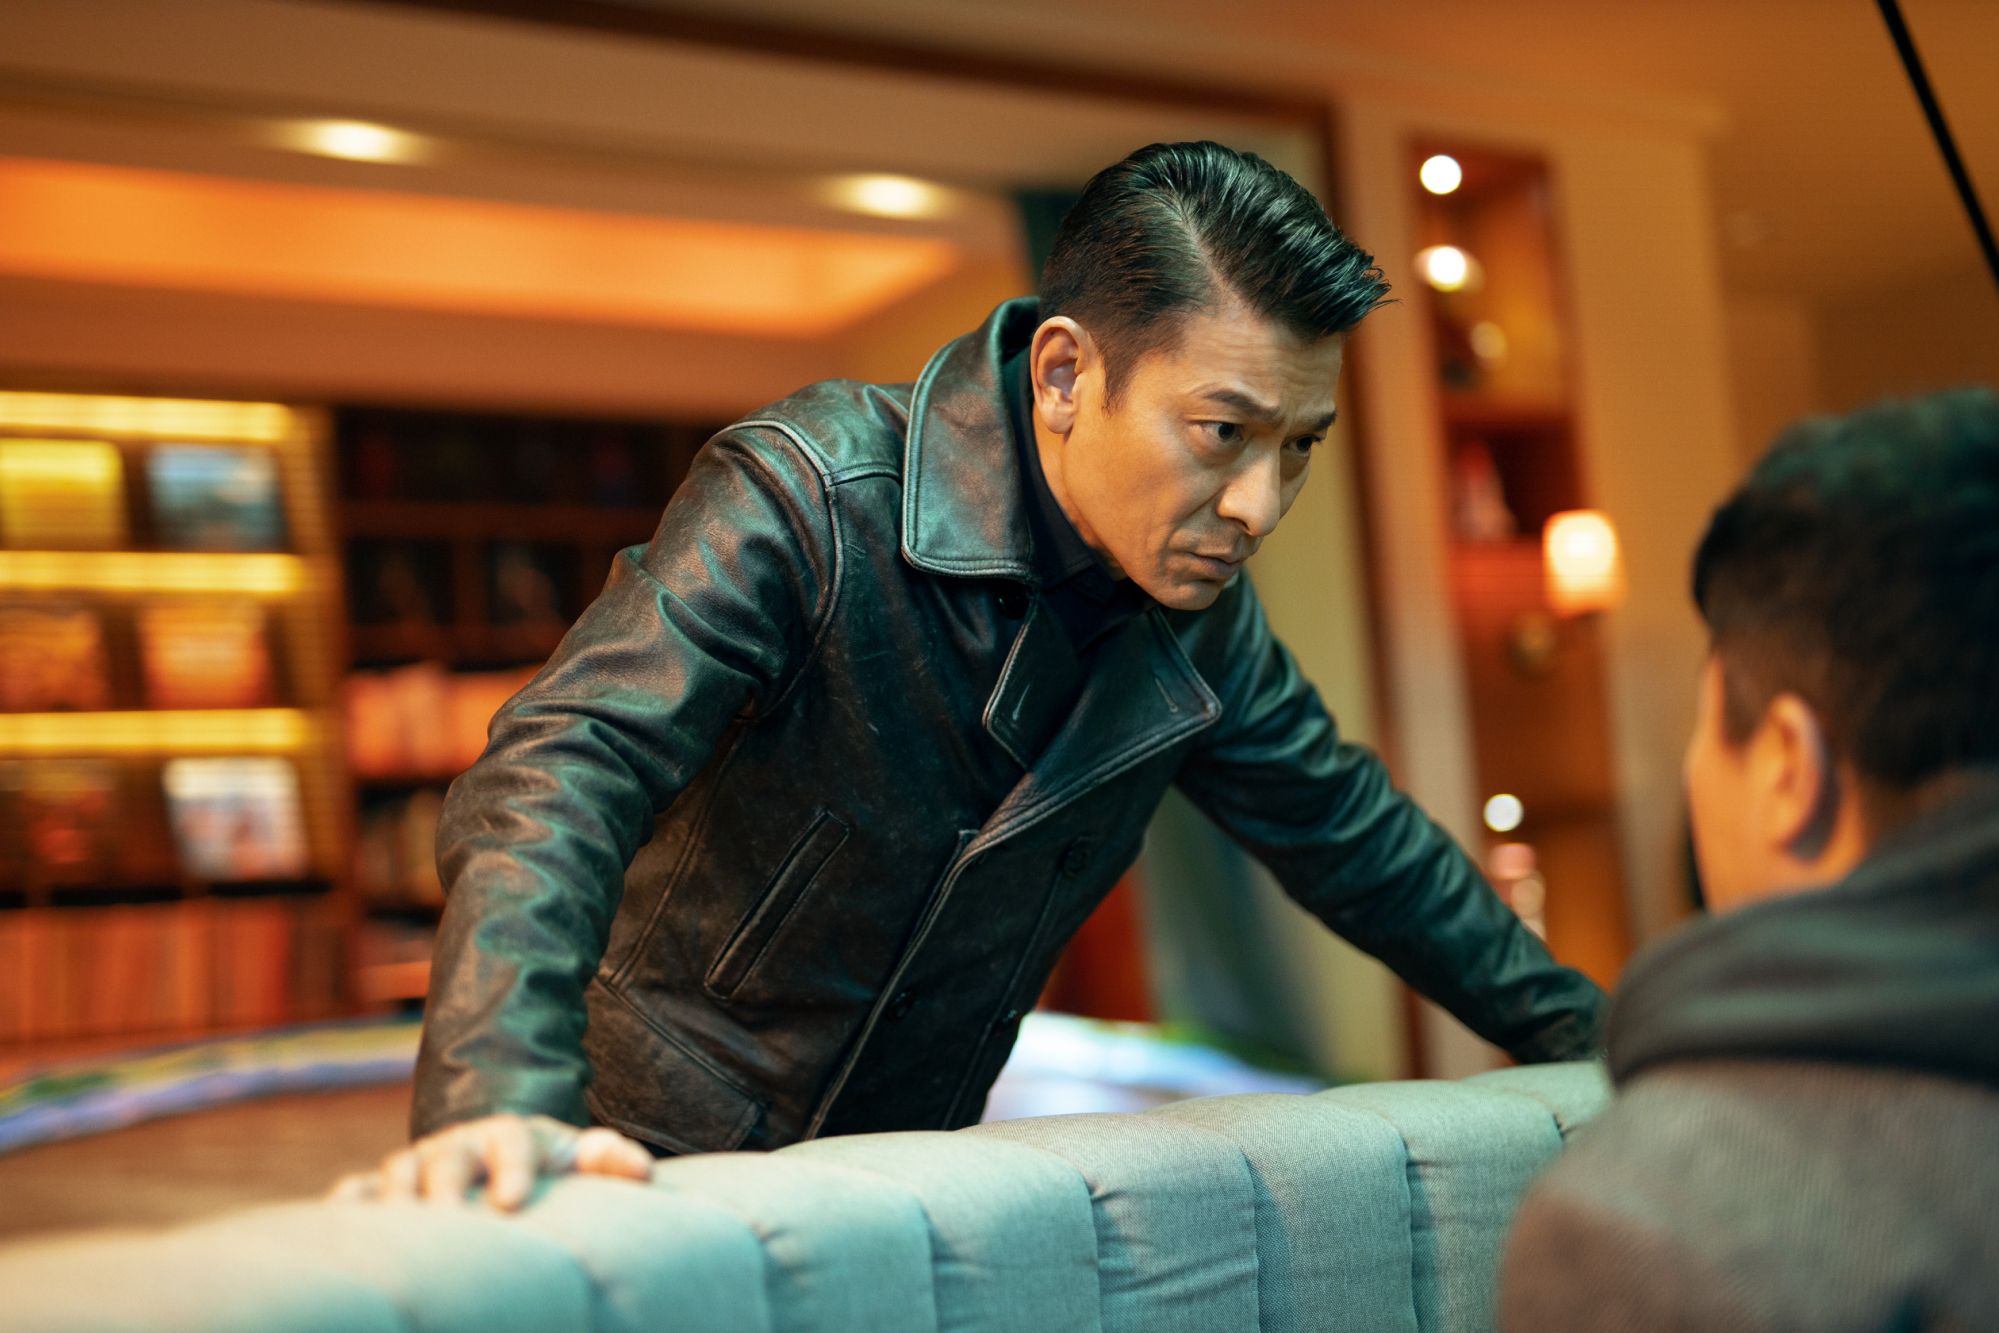 Endgame review: Comedy drama buoyed by Andy Lau's performance